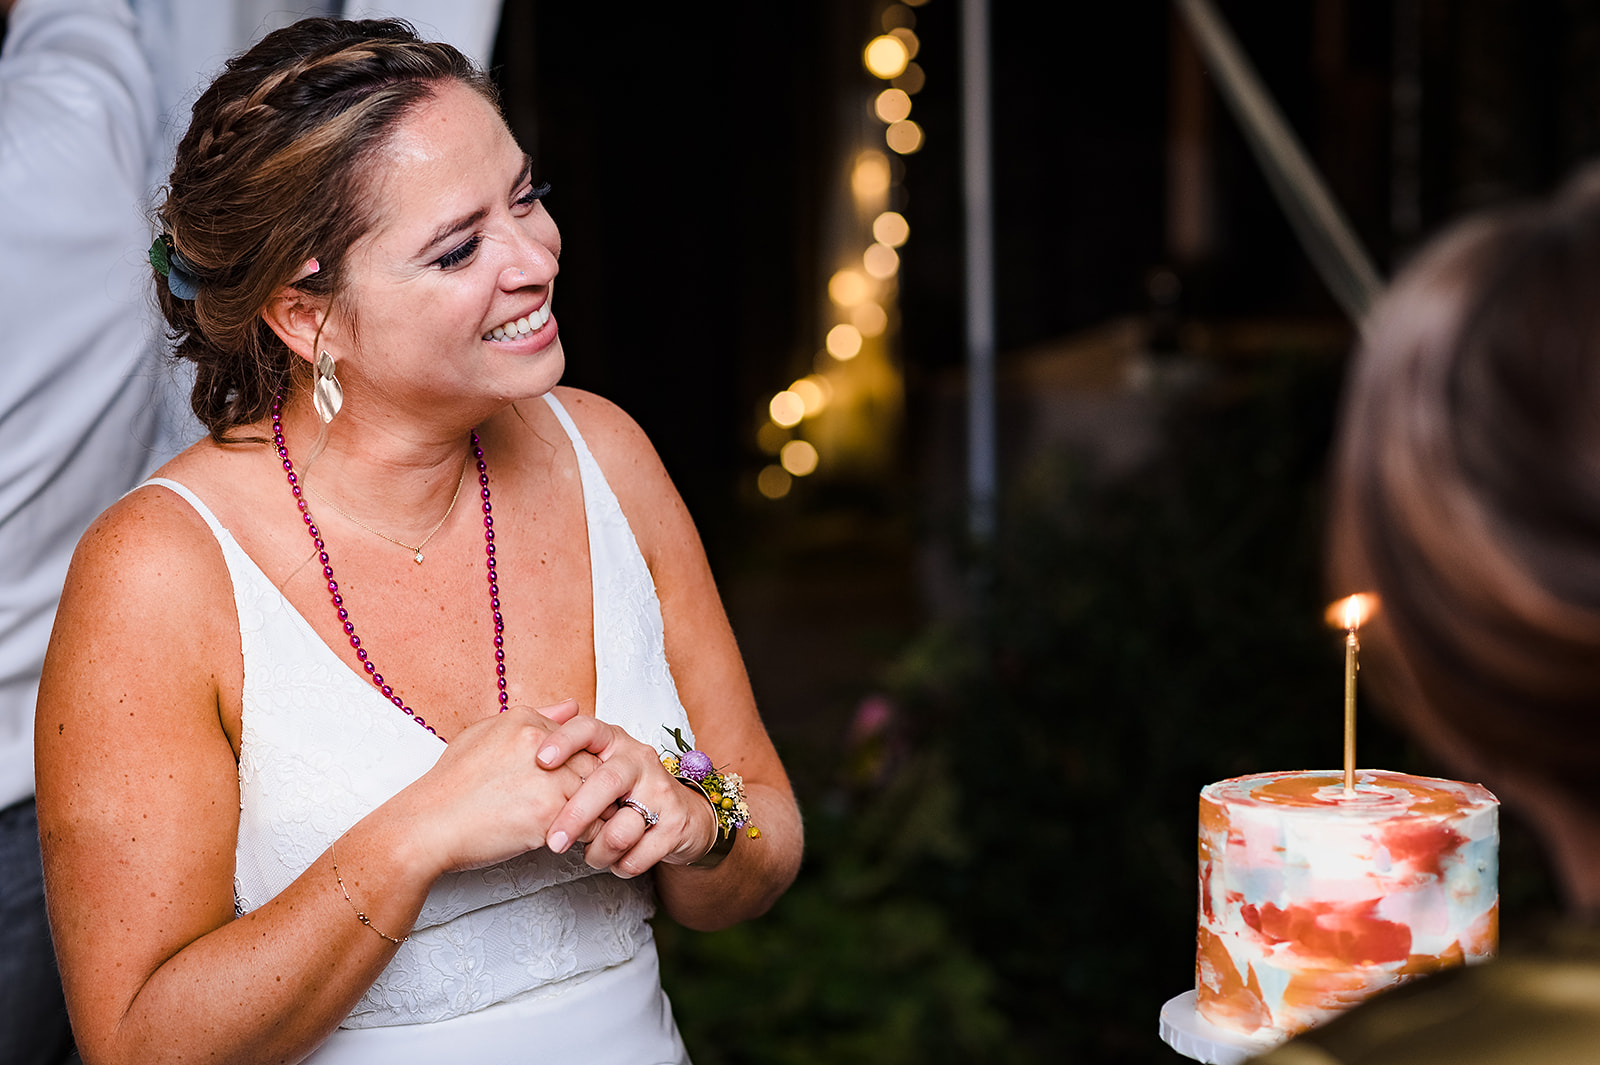 Bride with birthday cake being sung happy birthday